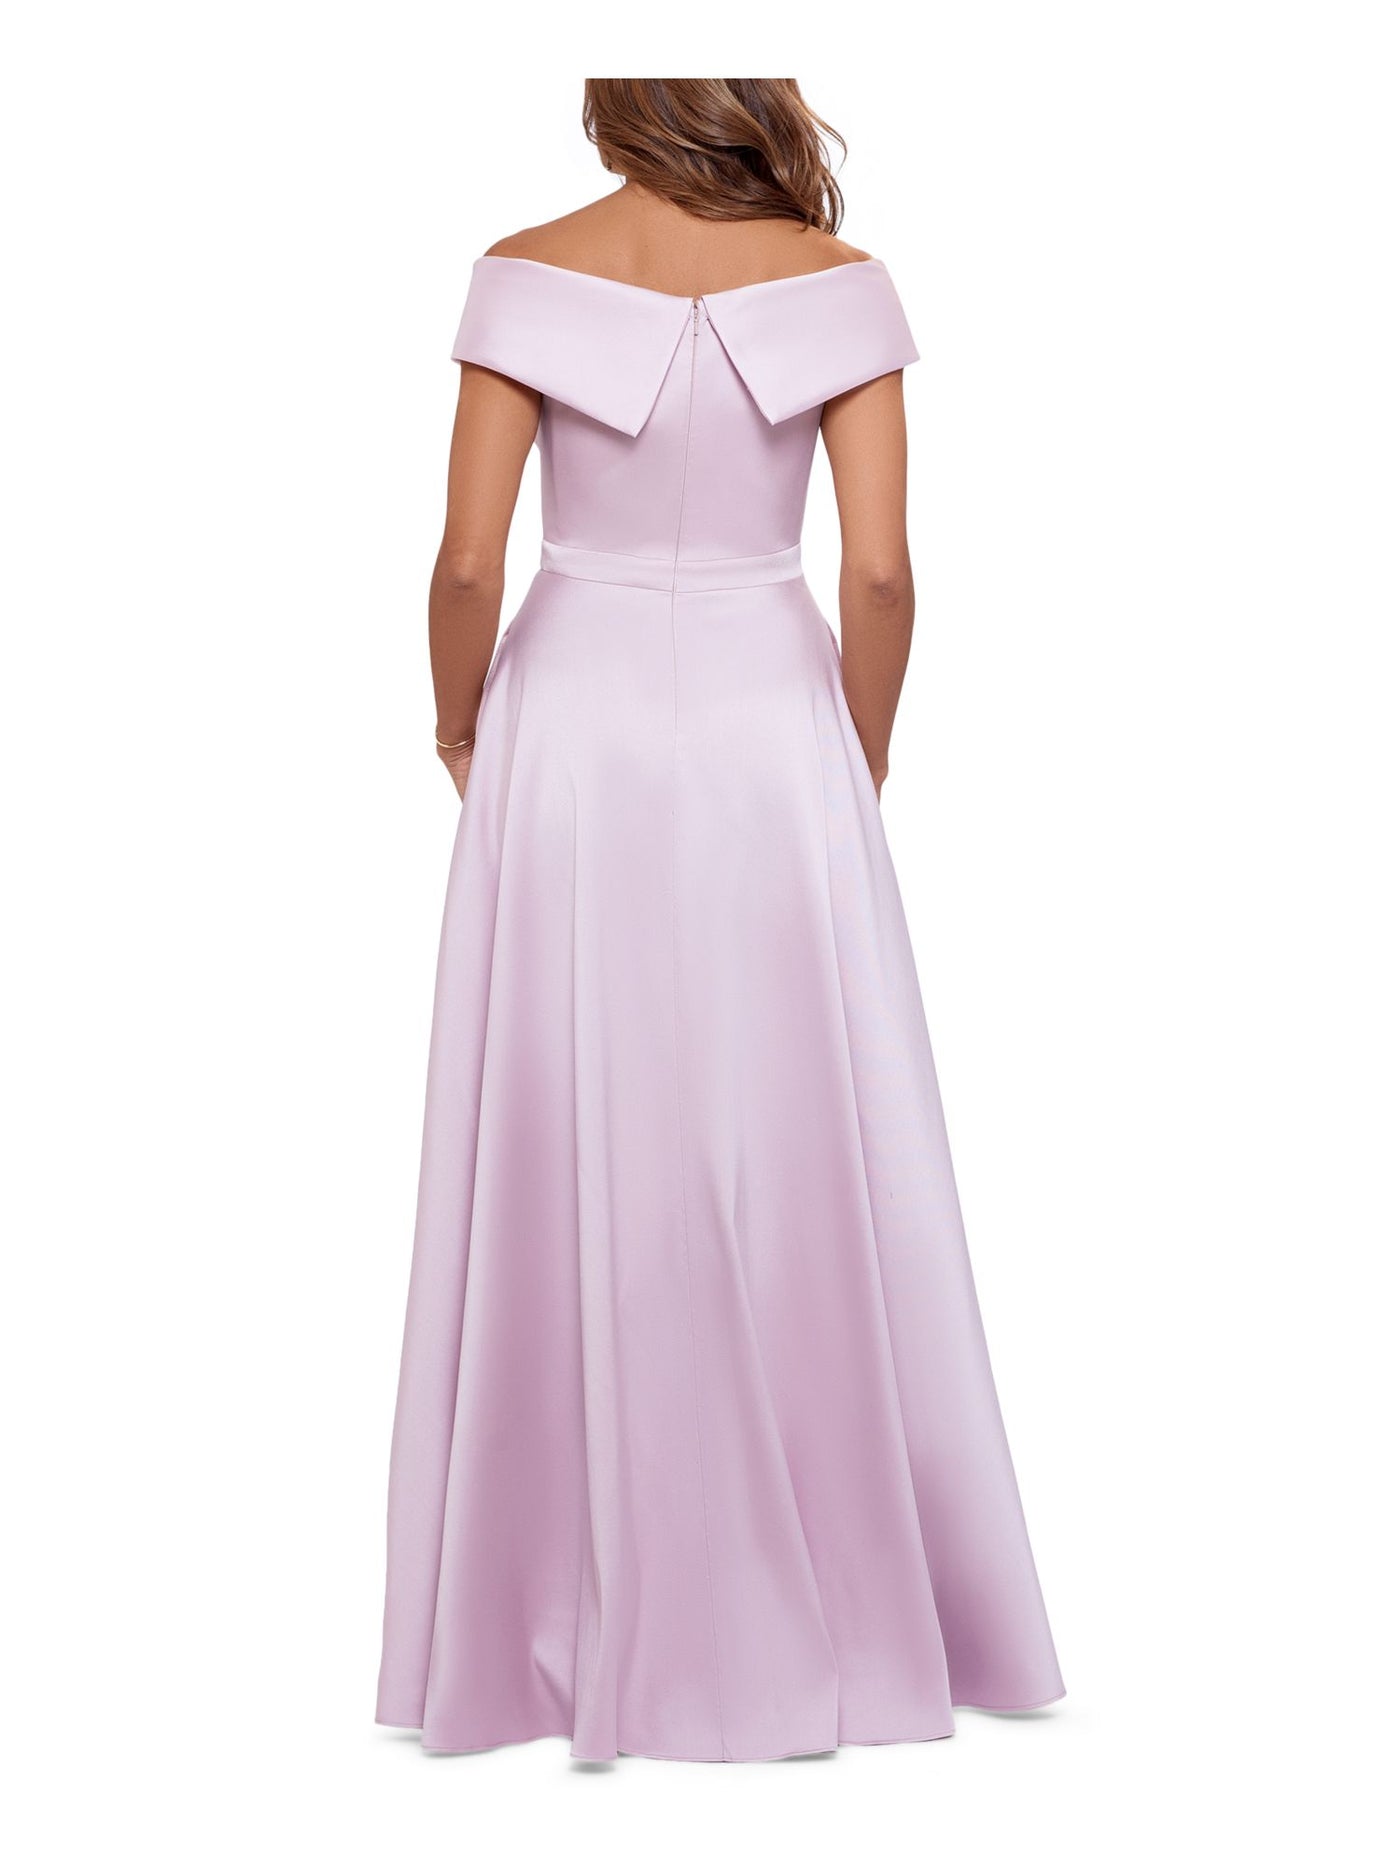 XSCAPE Womens Pink Zippered Pleated Fitted Pocketed Lined Short Sleeve Off Shoulder Full-Length Formal Gown Dress 2